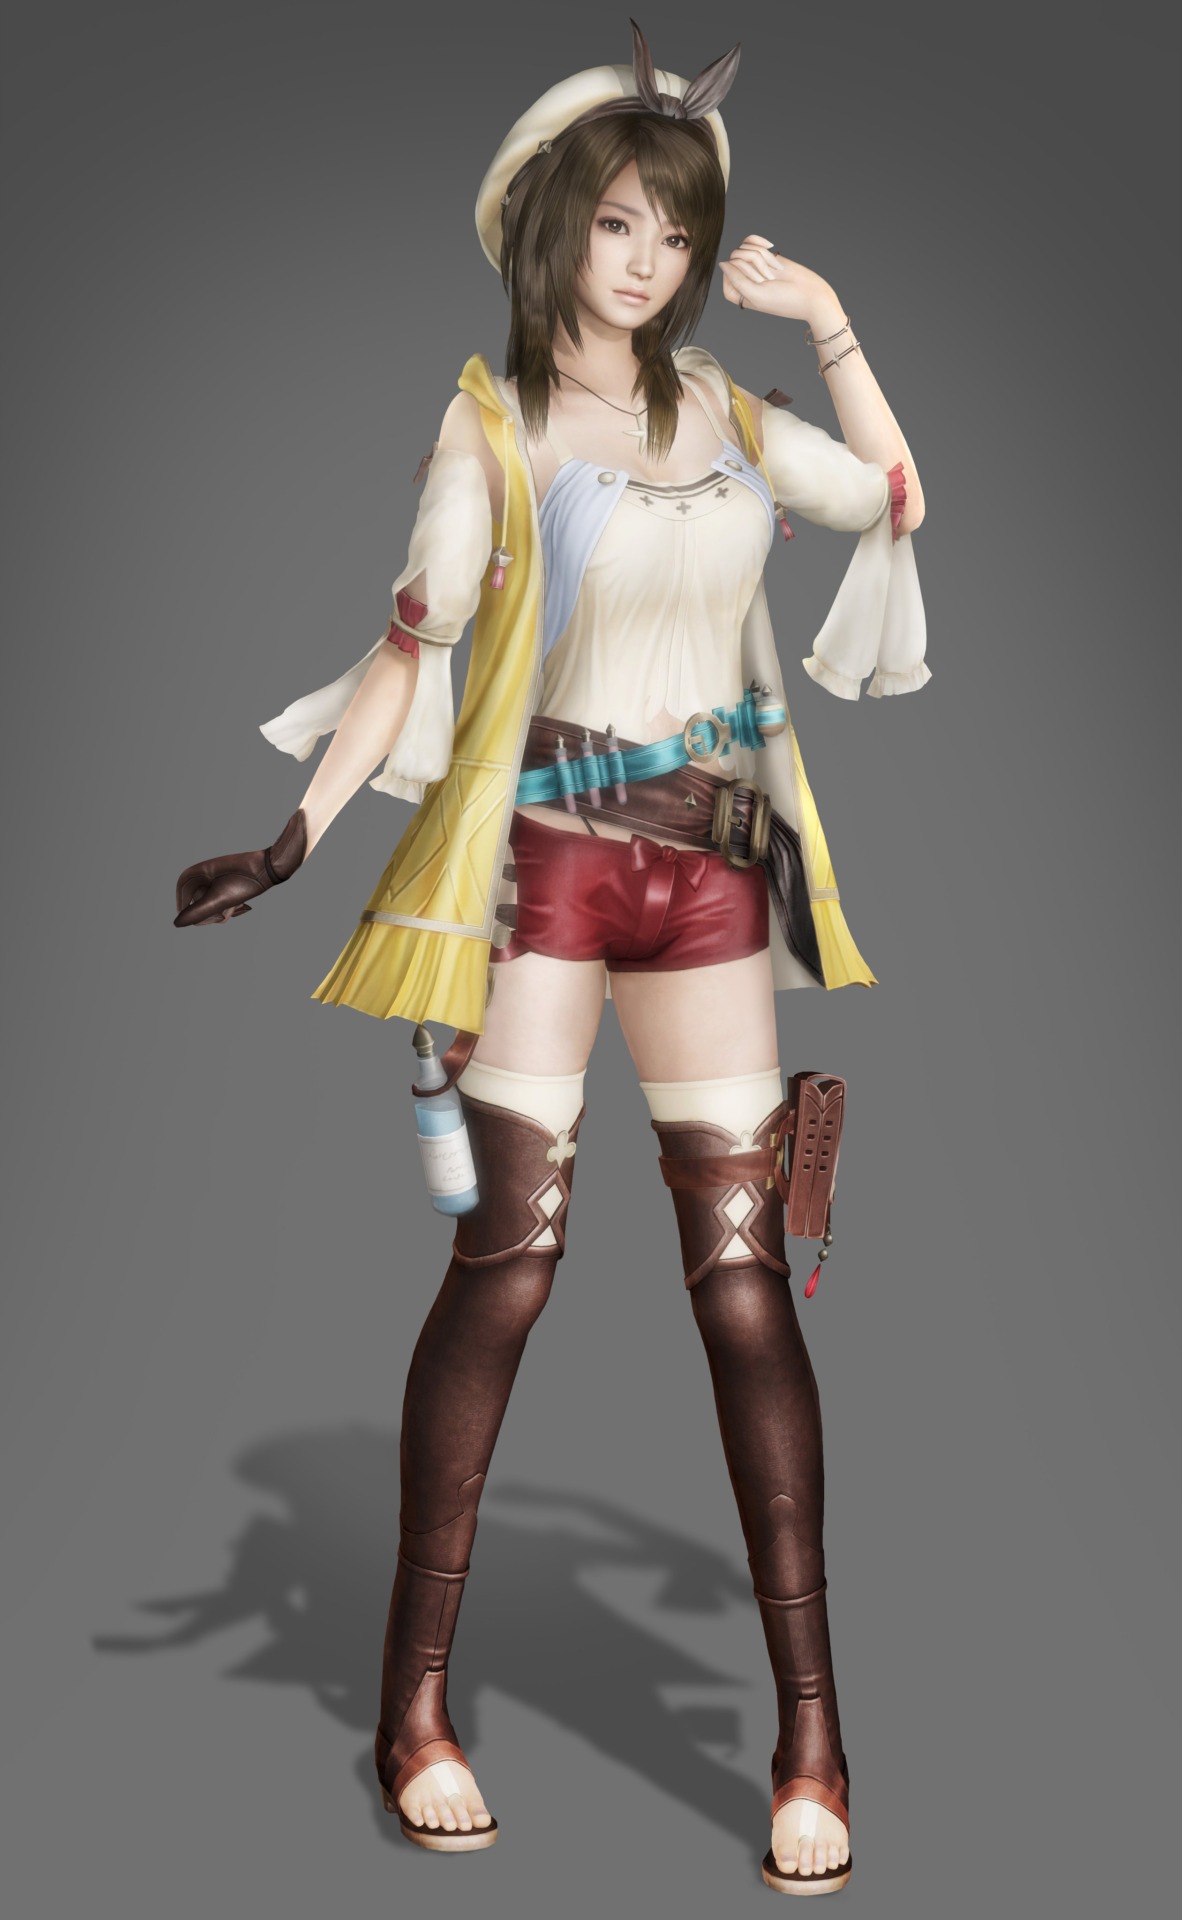 Yuri Kozukata, one of the playable characters, is wearing it in the image. 